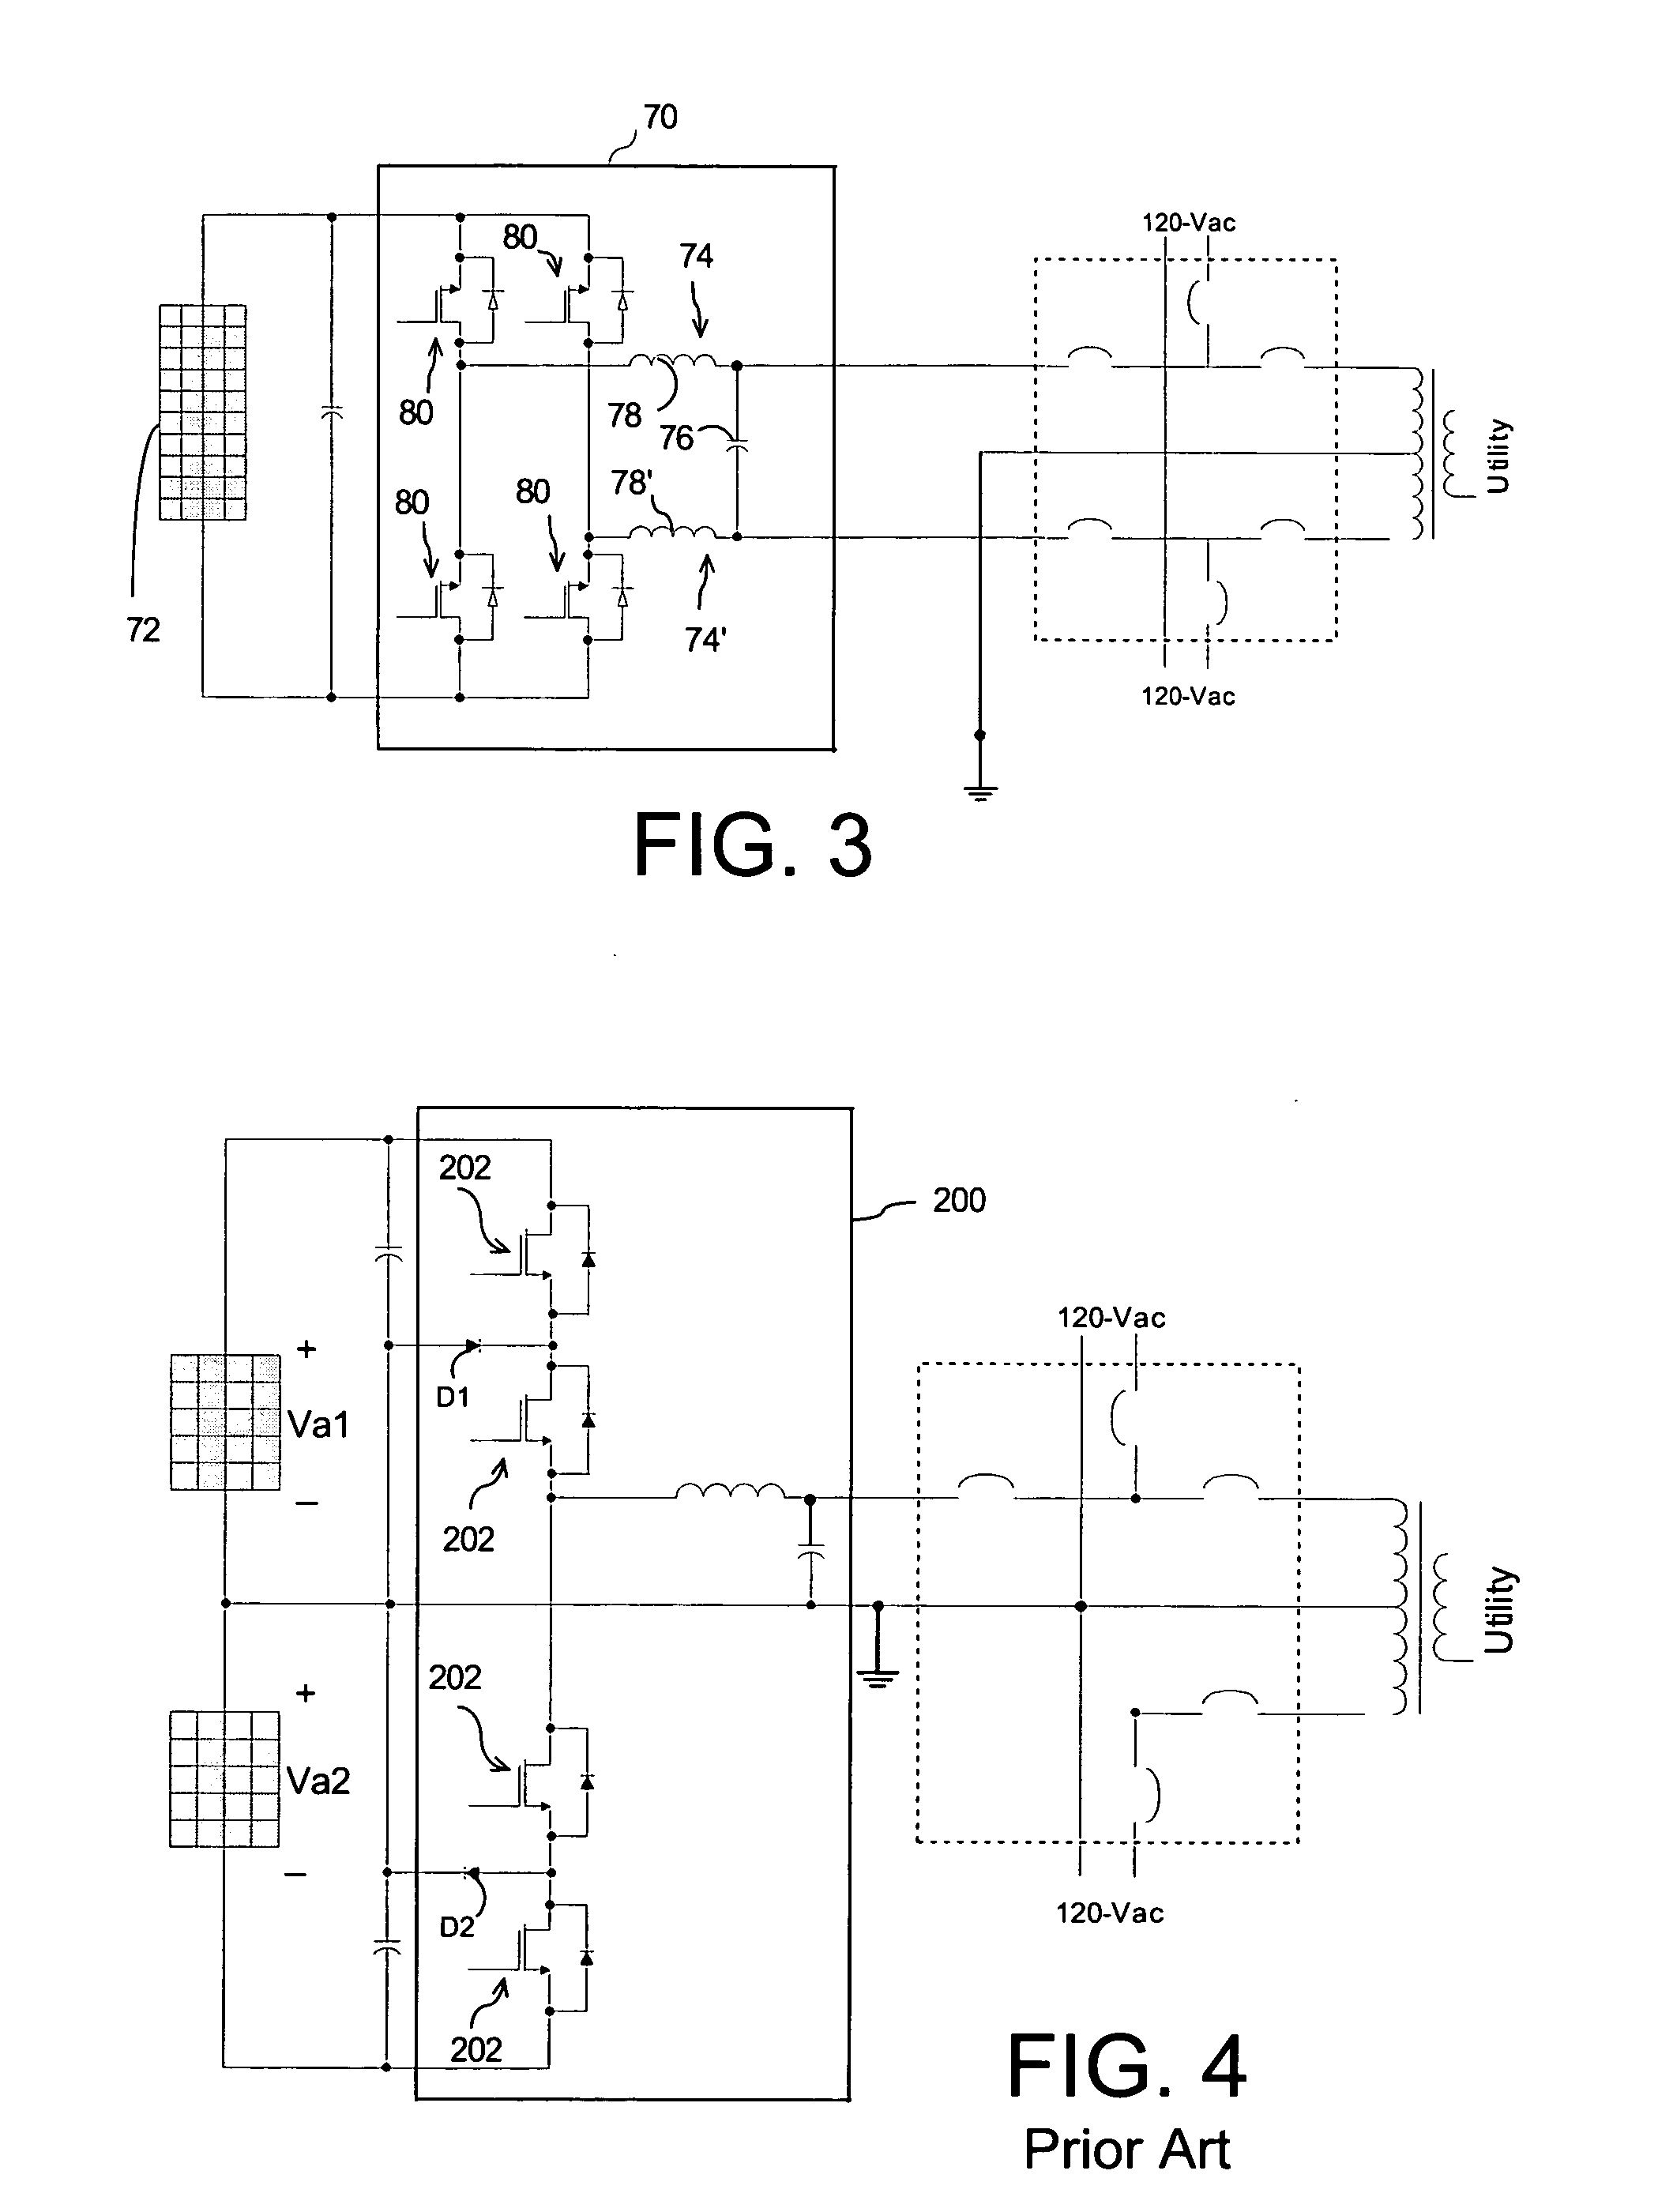 Transformerless power conversion in an inverter for a photovoltaic system